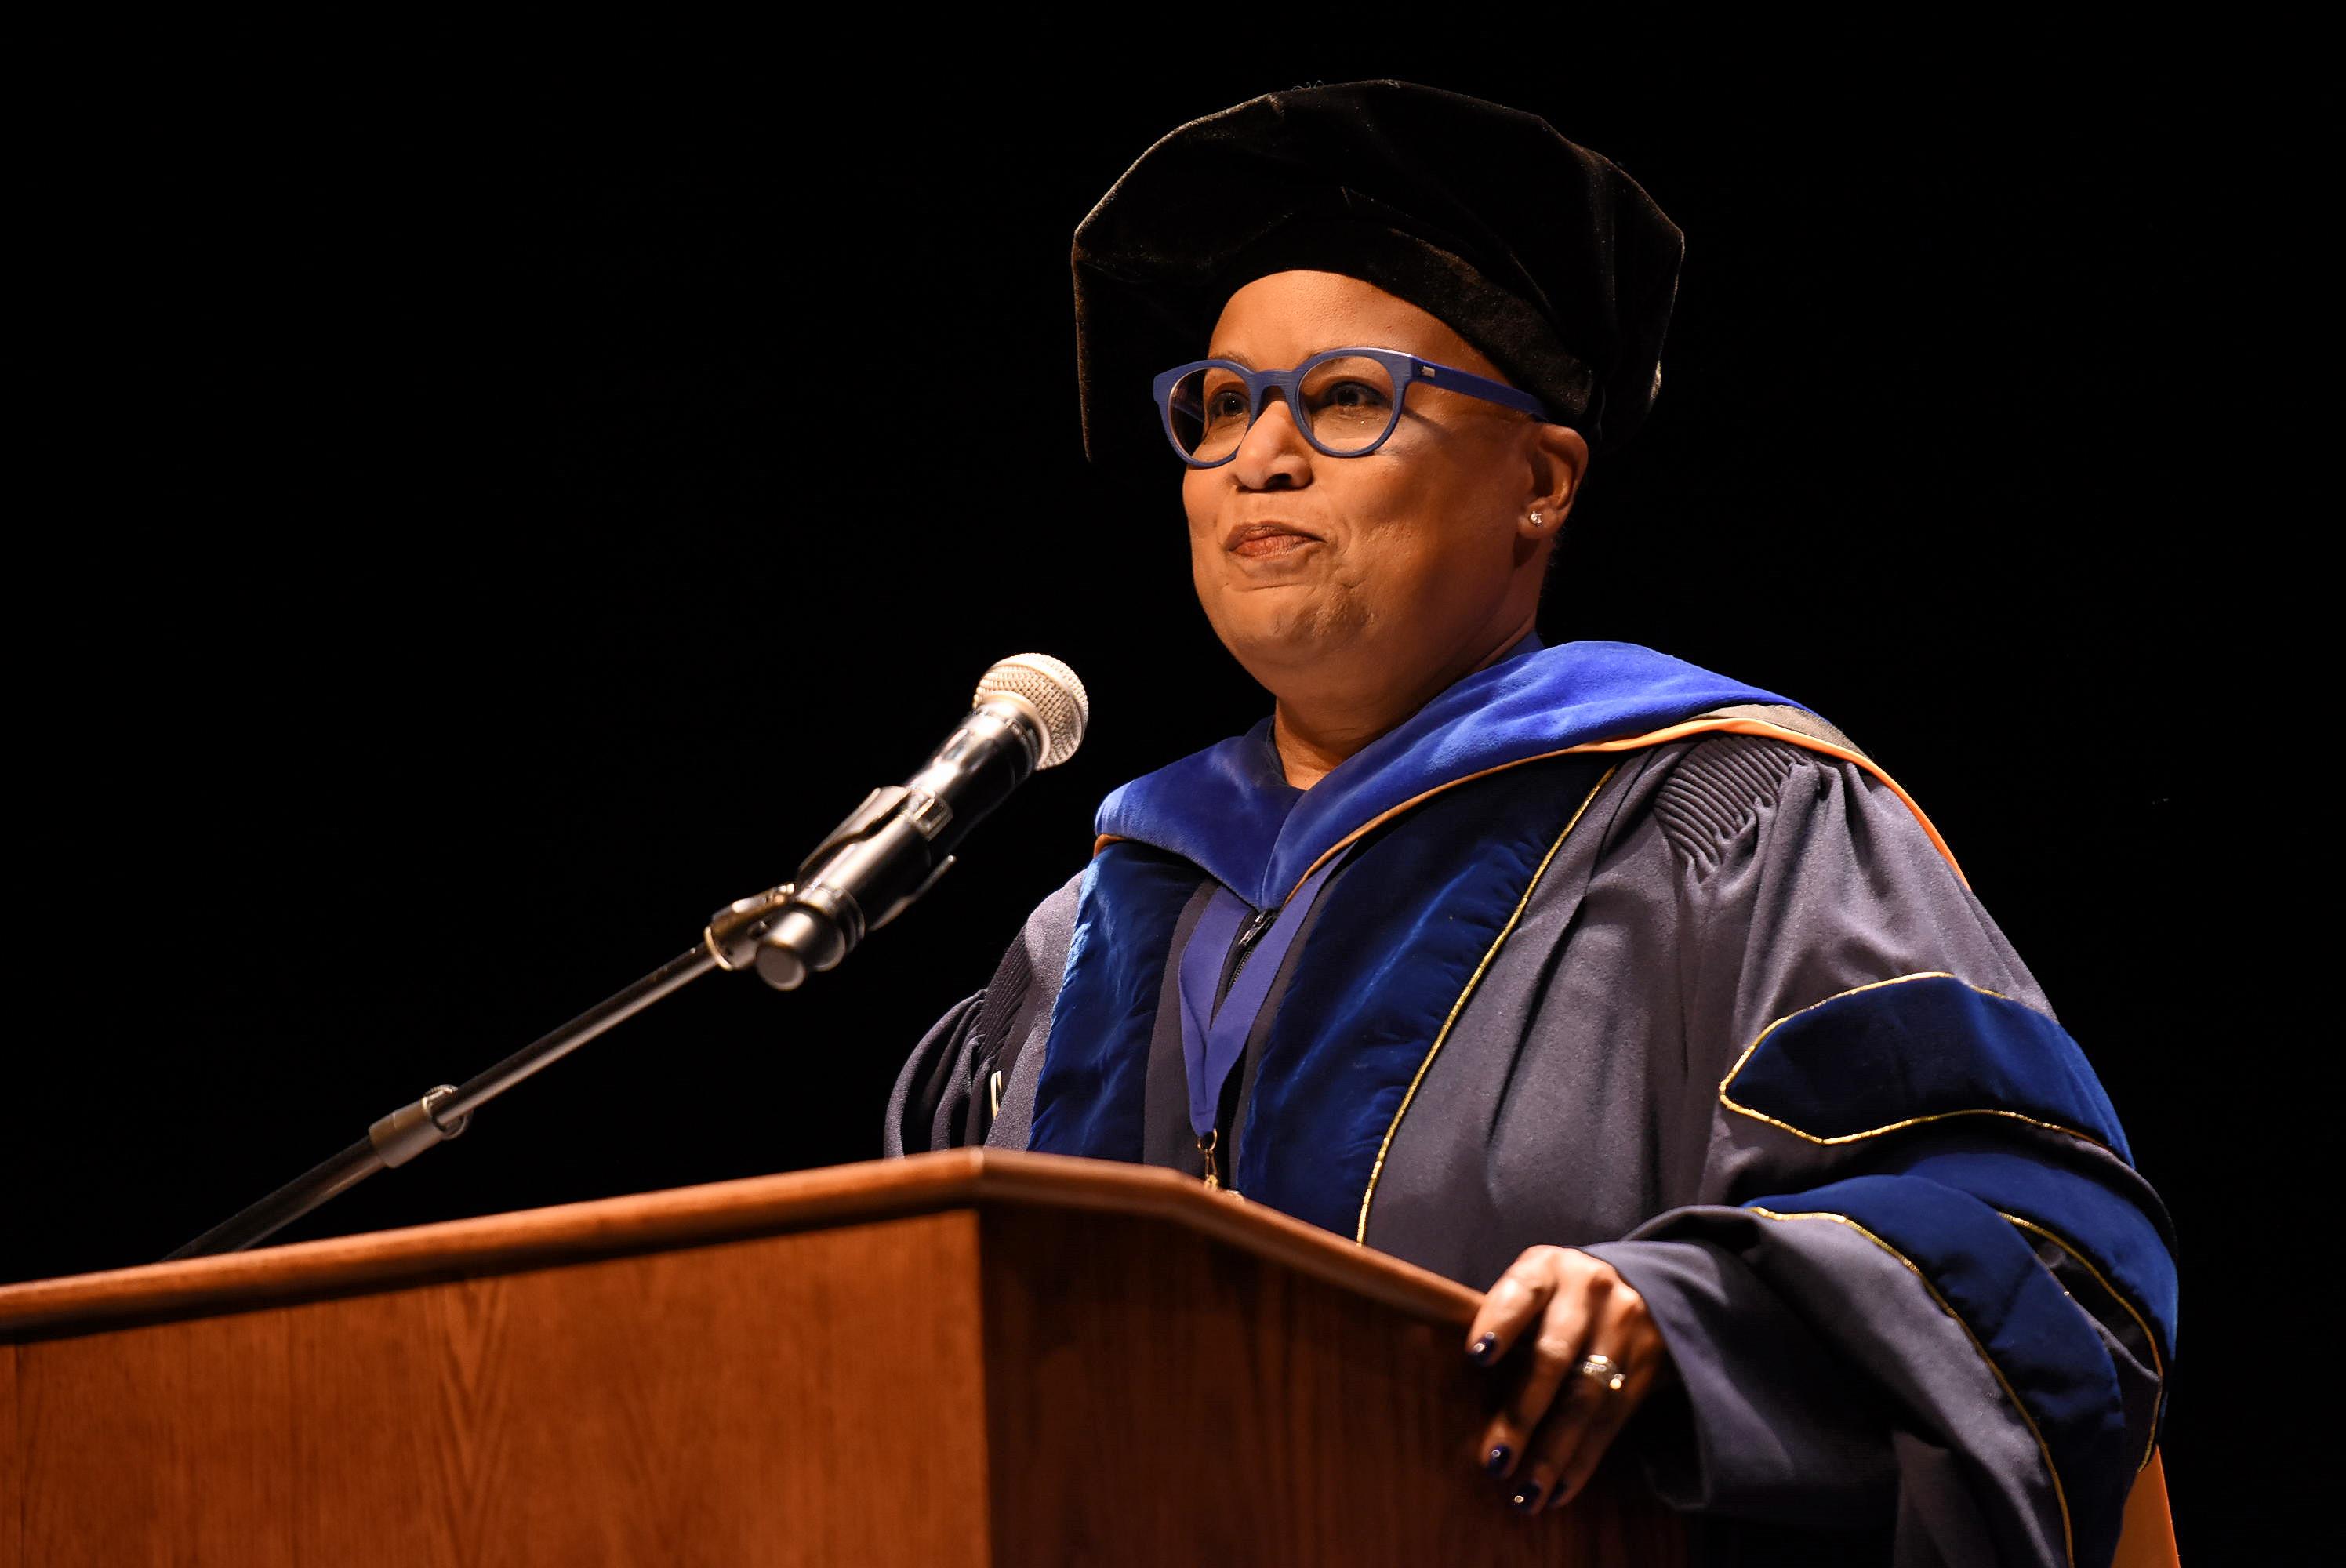 Speaker at podium during commencement wearing purple glasses